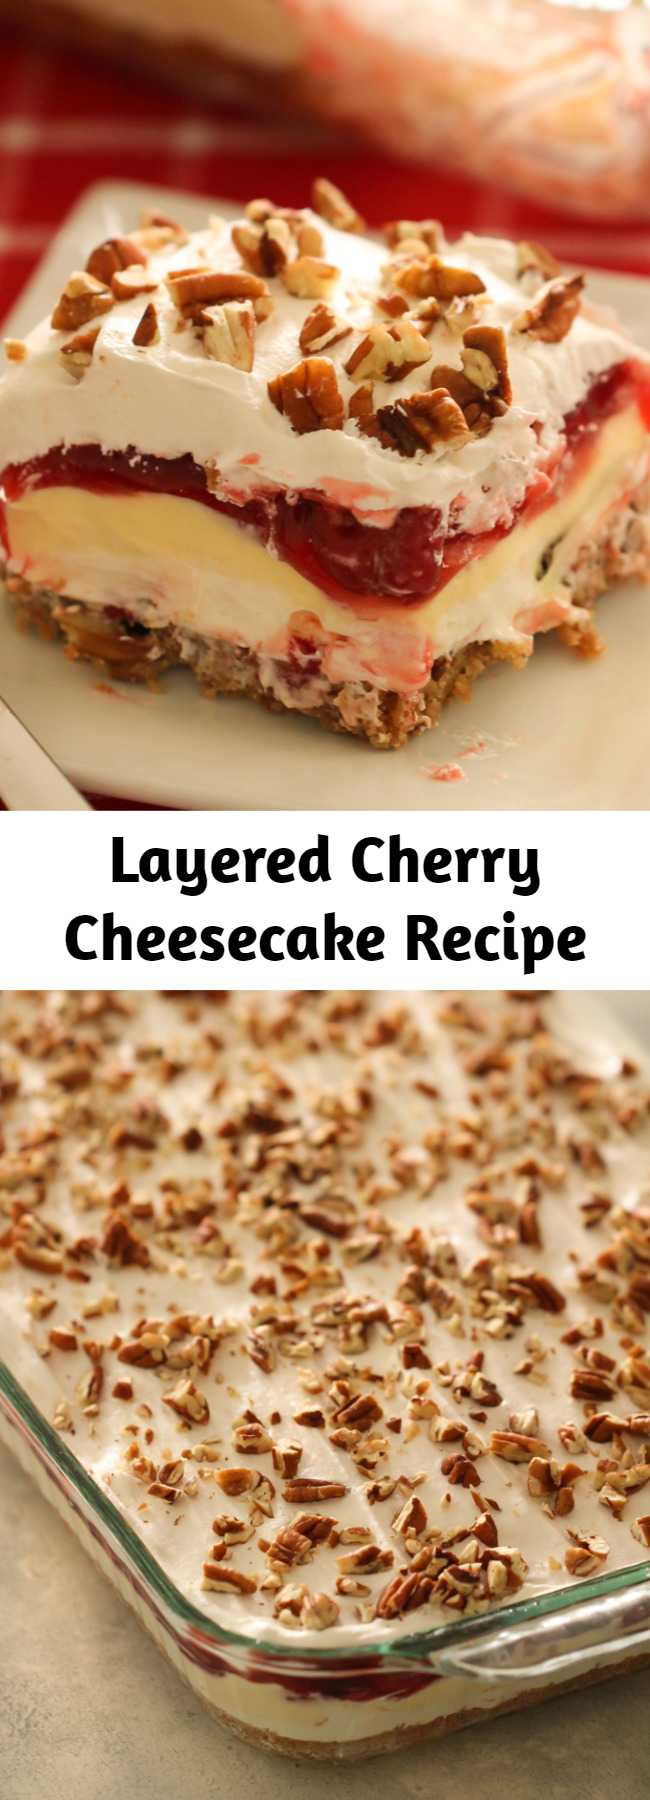 Layered Cherry Cheesecake Recipe - Get ready to enjoy the best, cherry cream cheese lush dessert you have ever tasted. This mind-blowing layered cherry cheesecake will have you coming back for more and friends asking for the recipe!